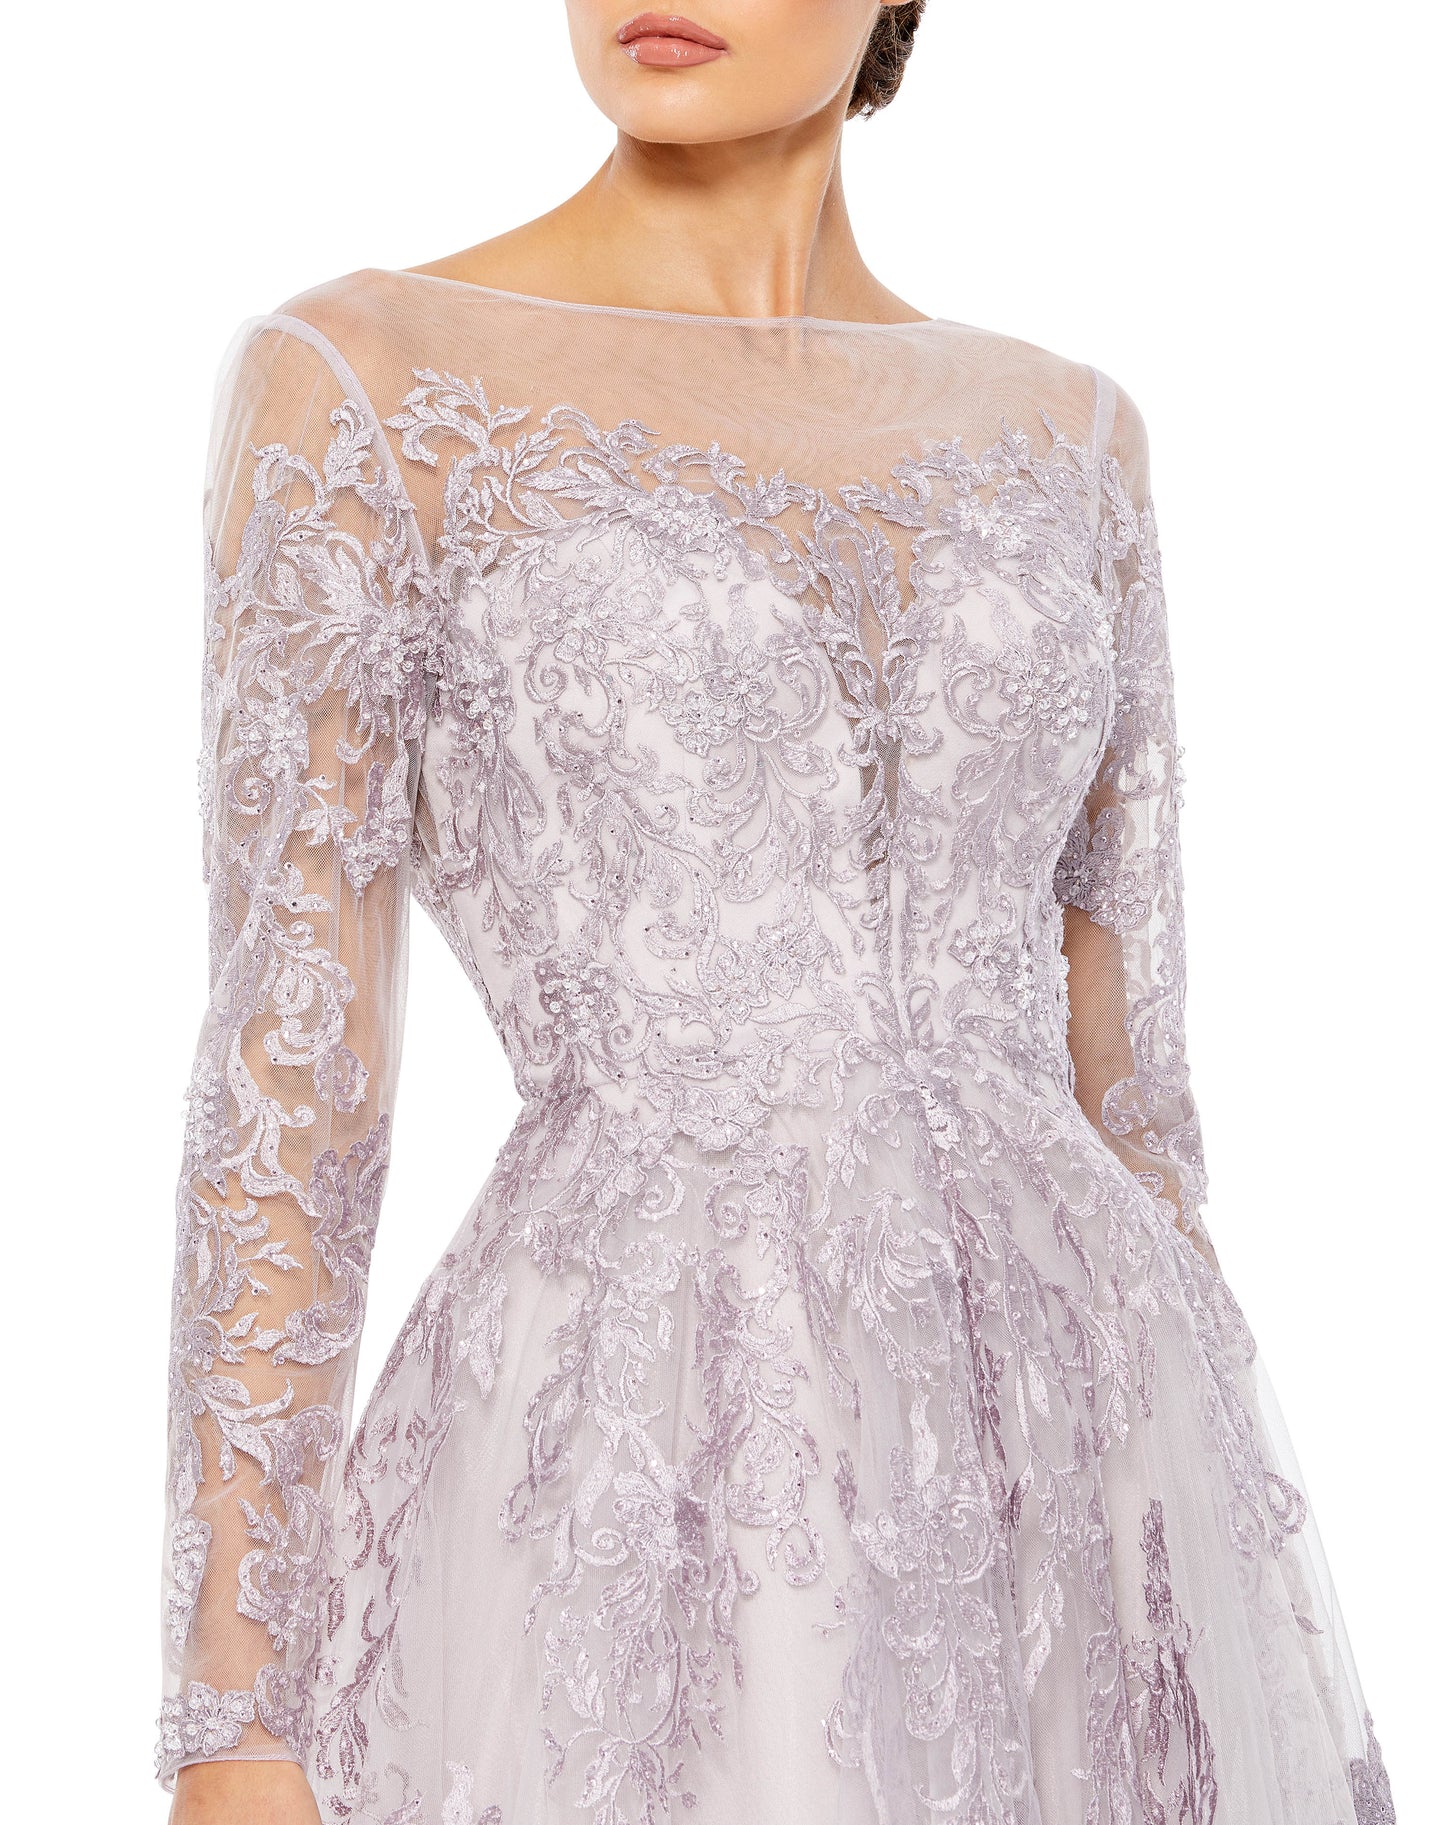 Mac Duggal Hand embellished tulle fabric (100% polyester) Partially lined bodice; fully lined skirt; semi-sheer unlined sleeves Illusion boat neckline Long sleeves Concealed back zipper Approx. 62.5" from top of shoulder to bottom hem Available in Lilac S